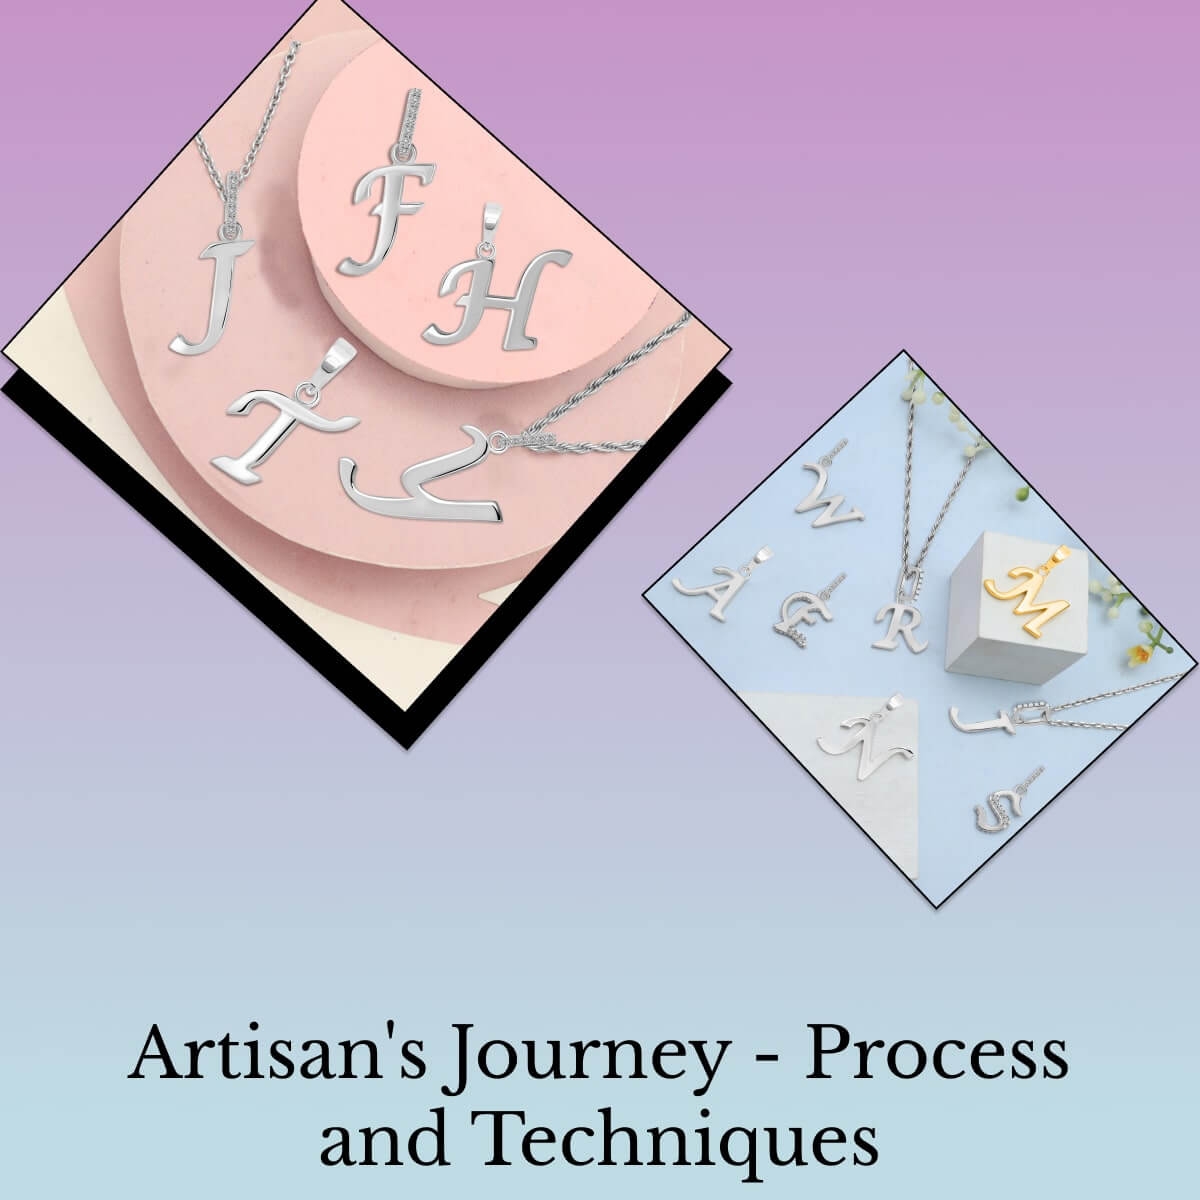 Creation Process and Techniques